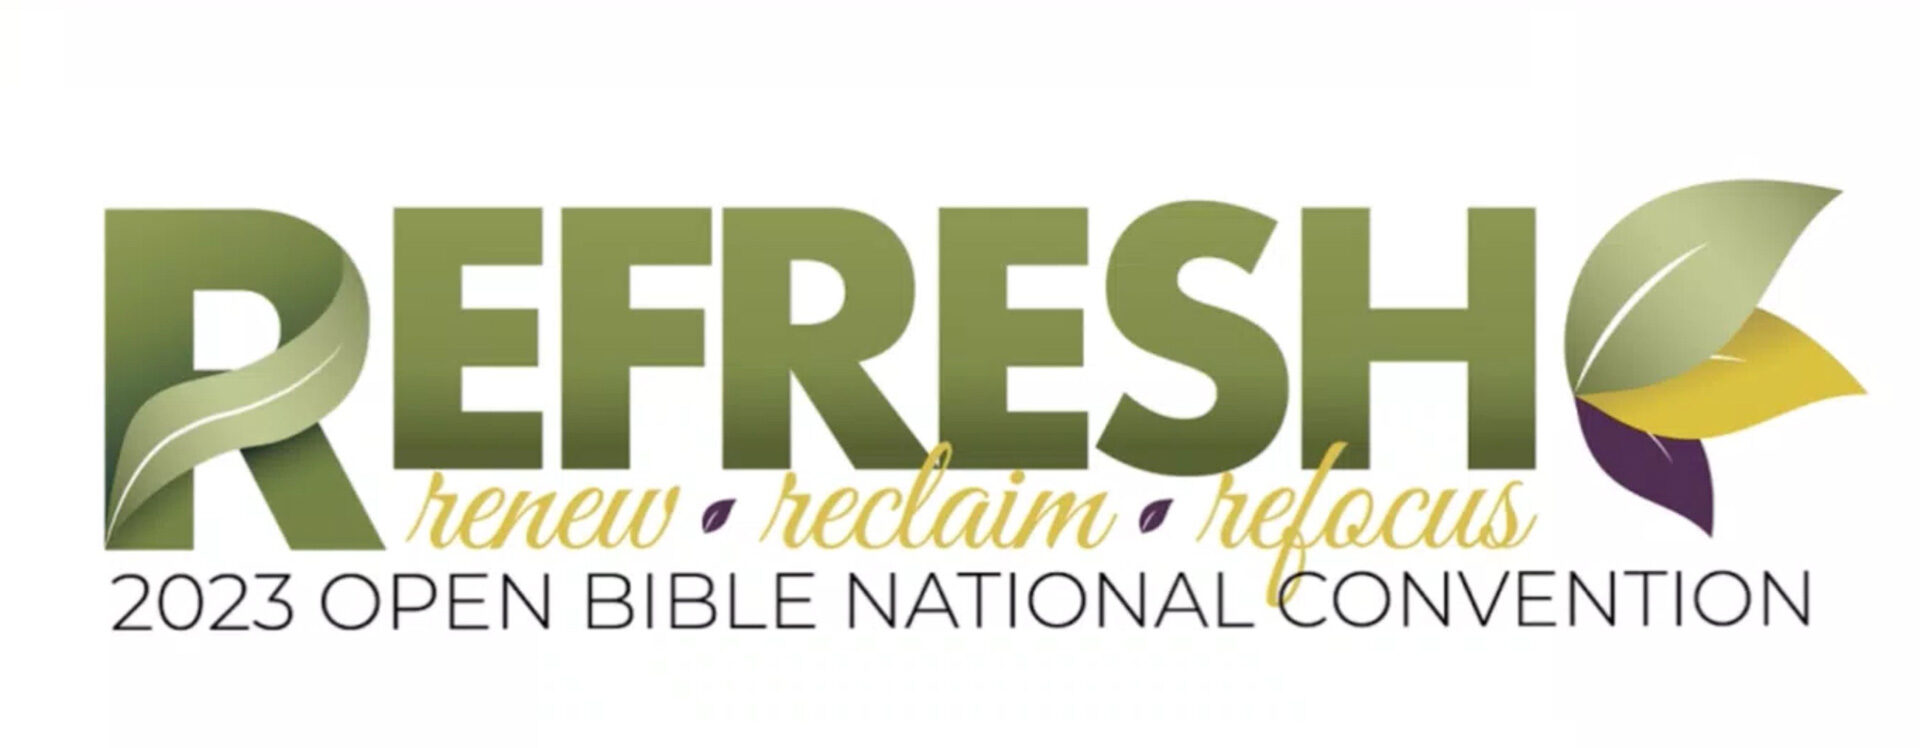 Meet our Refresh ’23 Convention Speakers